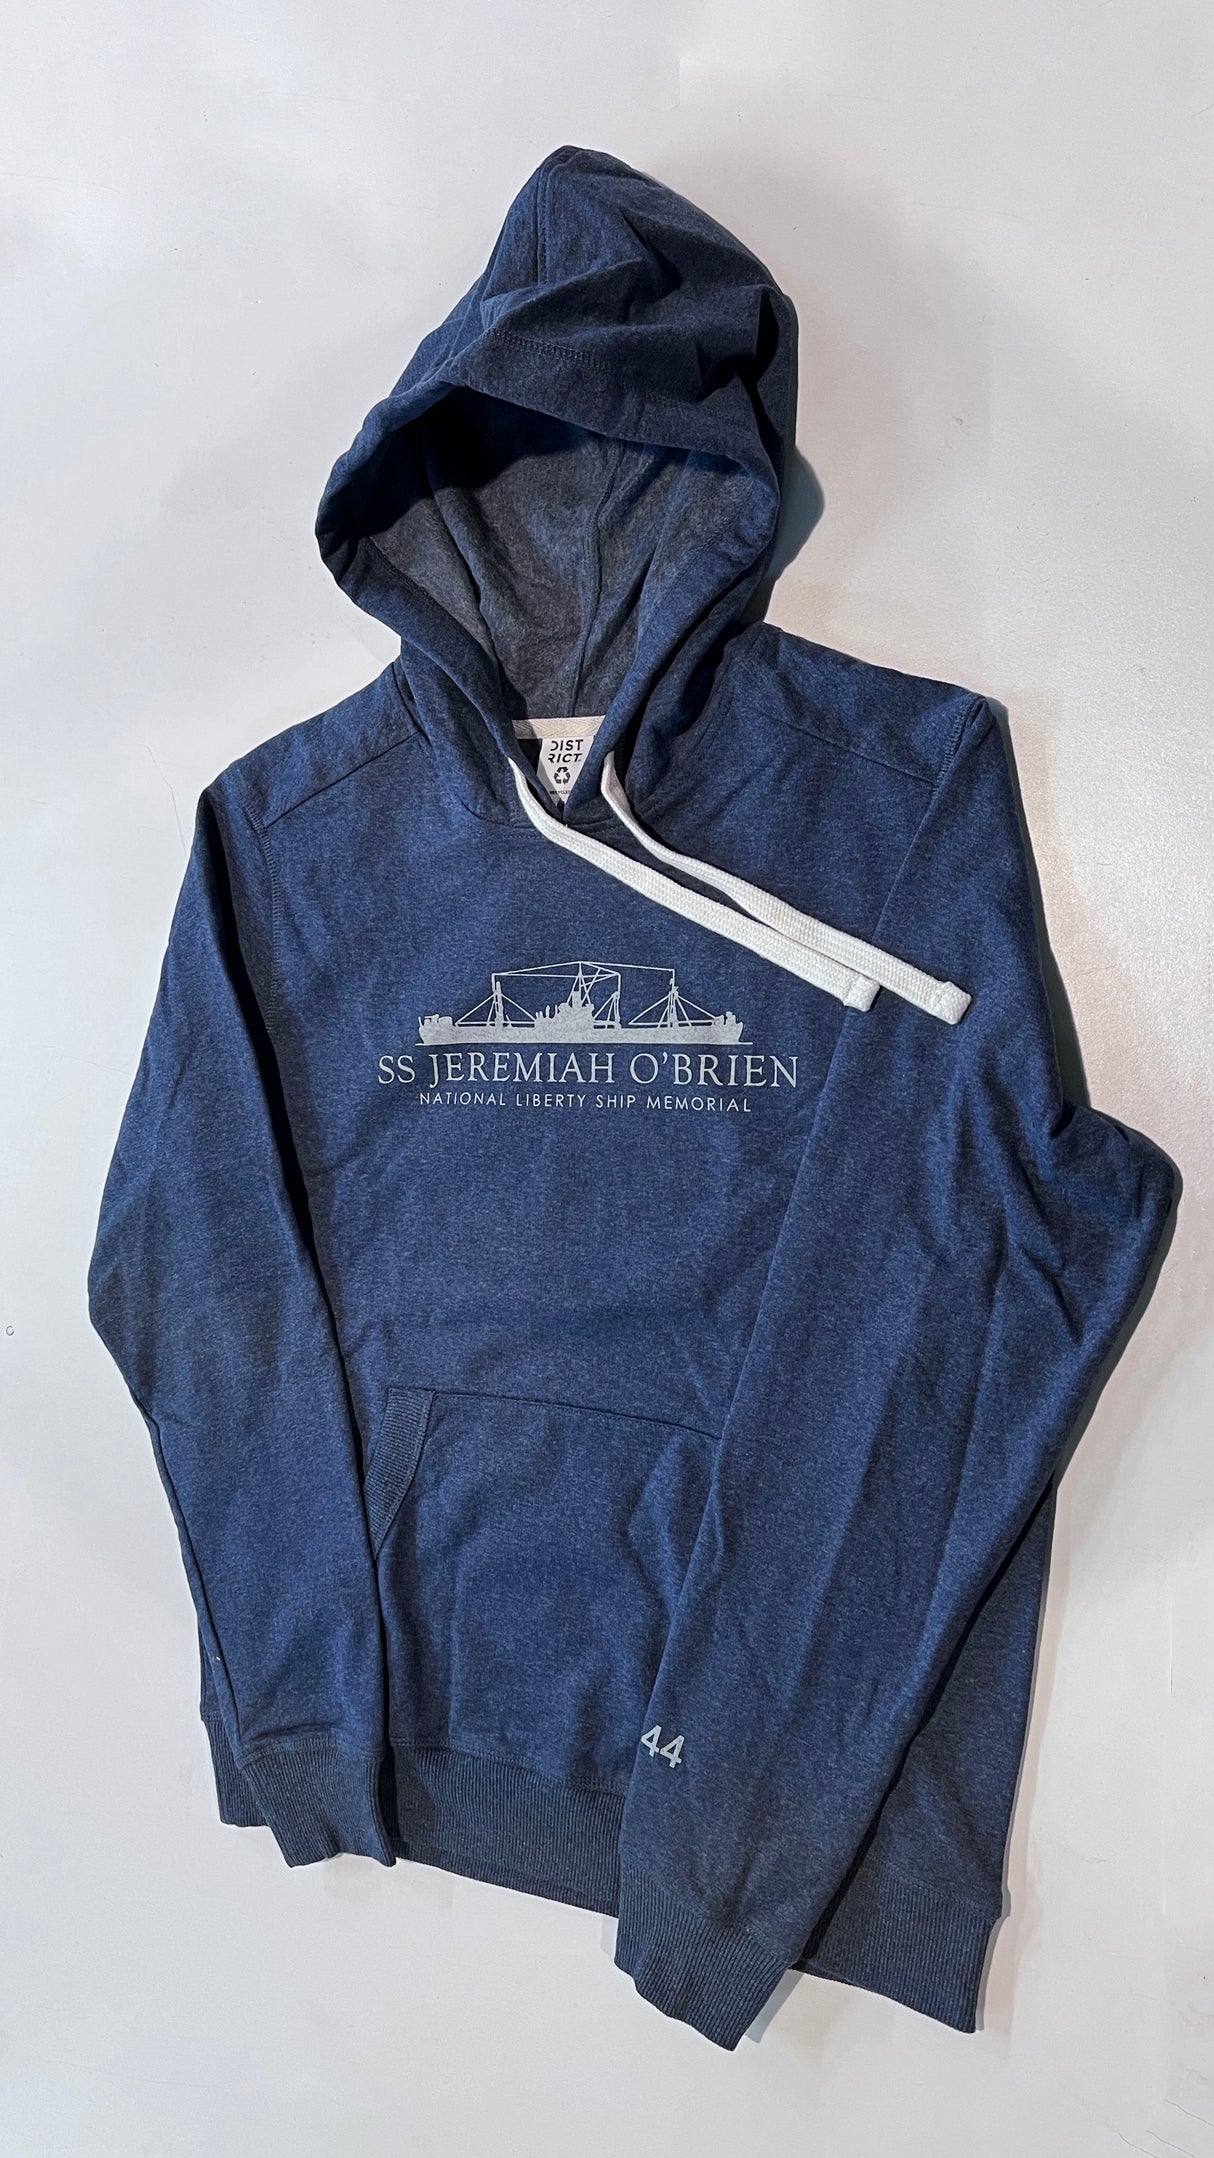 SS Jeremiah O'Brien Hoodie Pullover - 6.6.1944